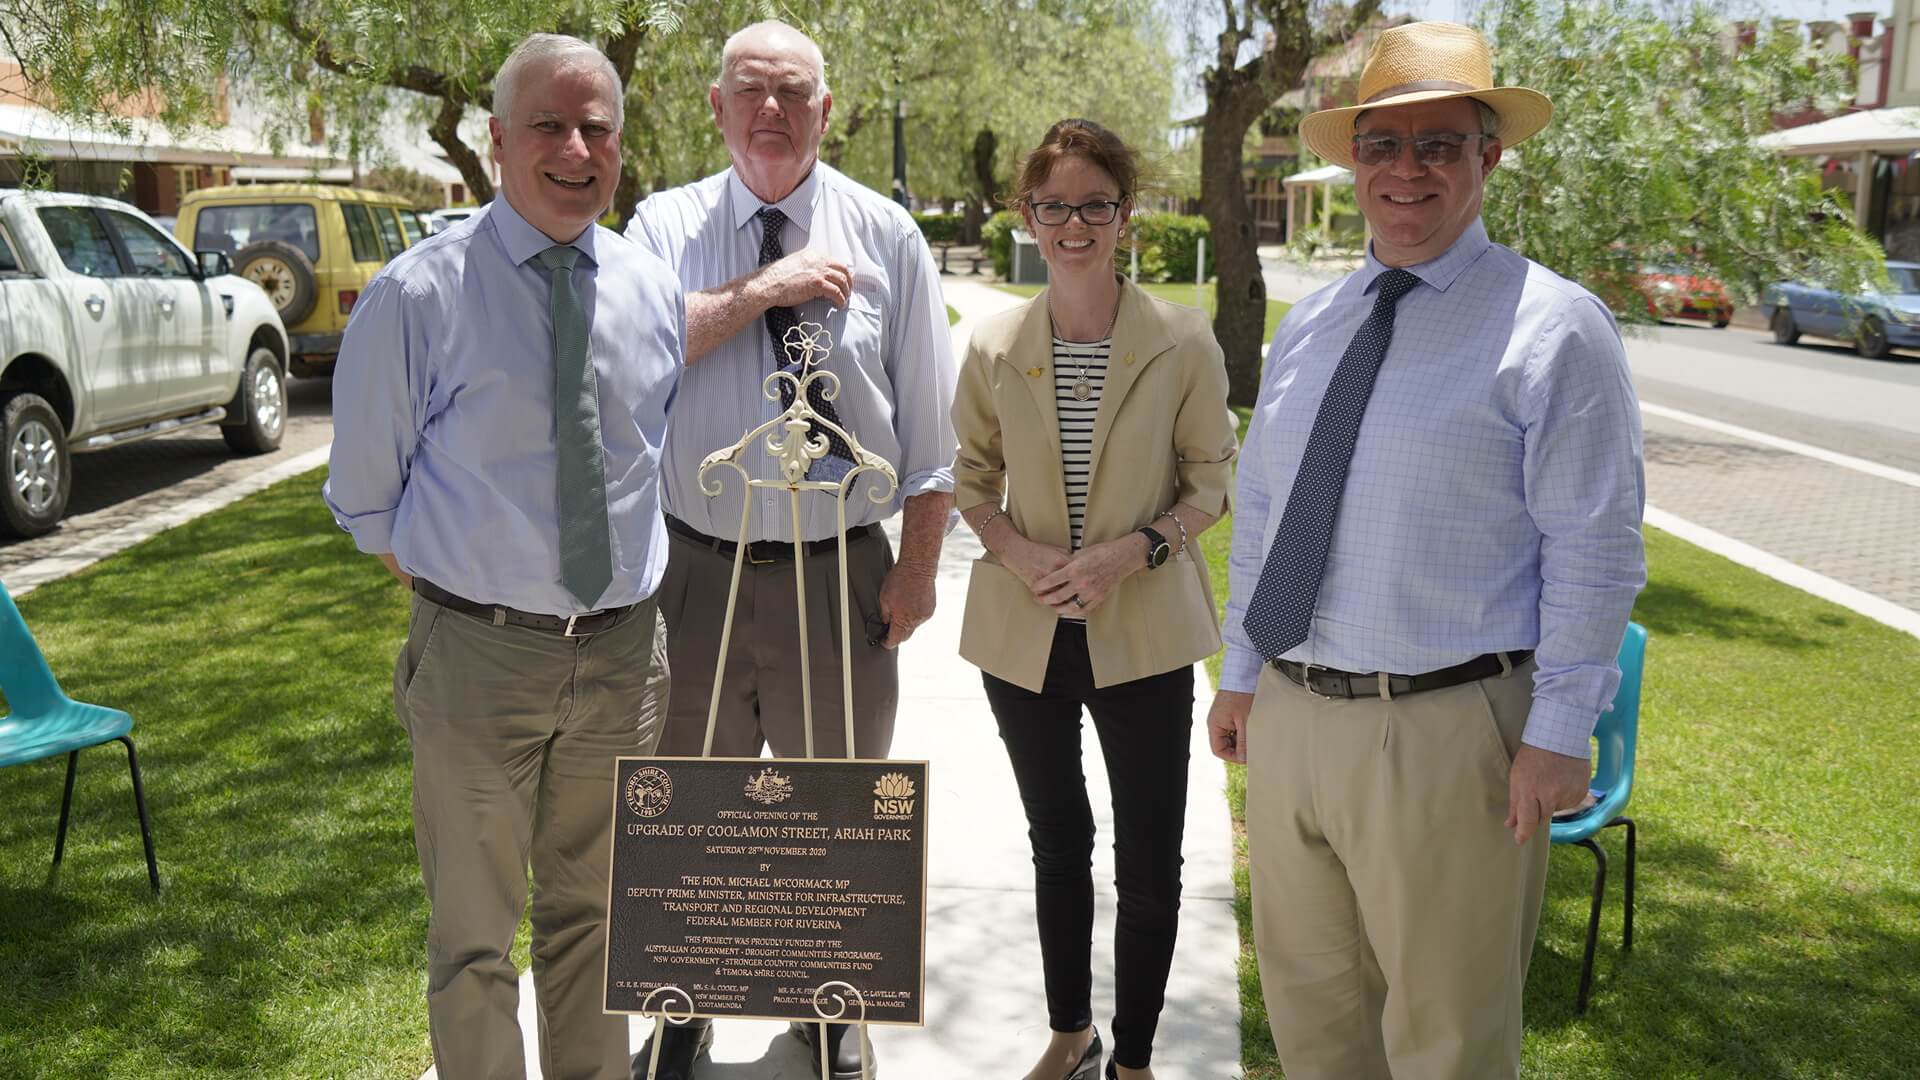 Michael McCormack, Nigel Judd, Steph Cooke and Rick Firman stand around a plaque which sits on an easel. Behind them is new grass and trees.